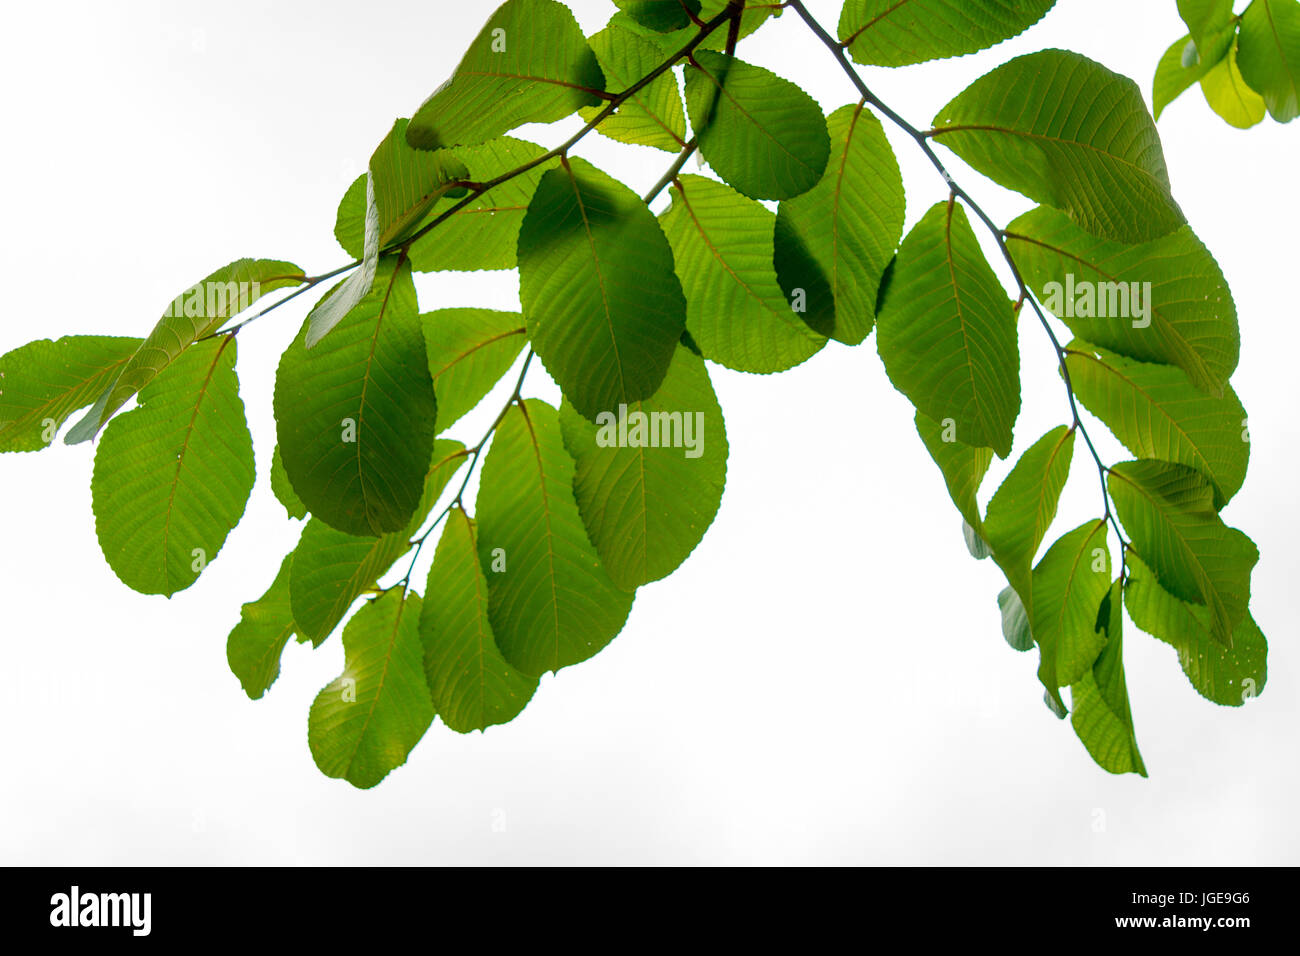 Branches and leaves on a white background. Stock Photo